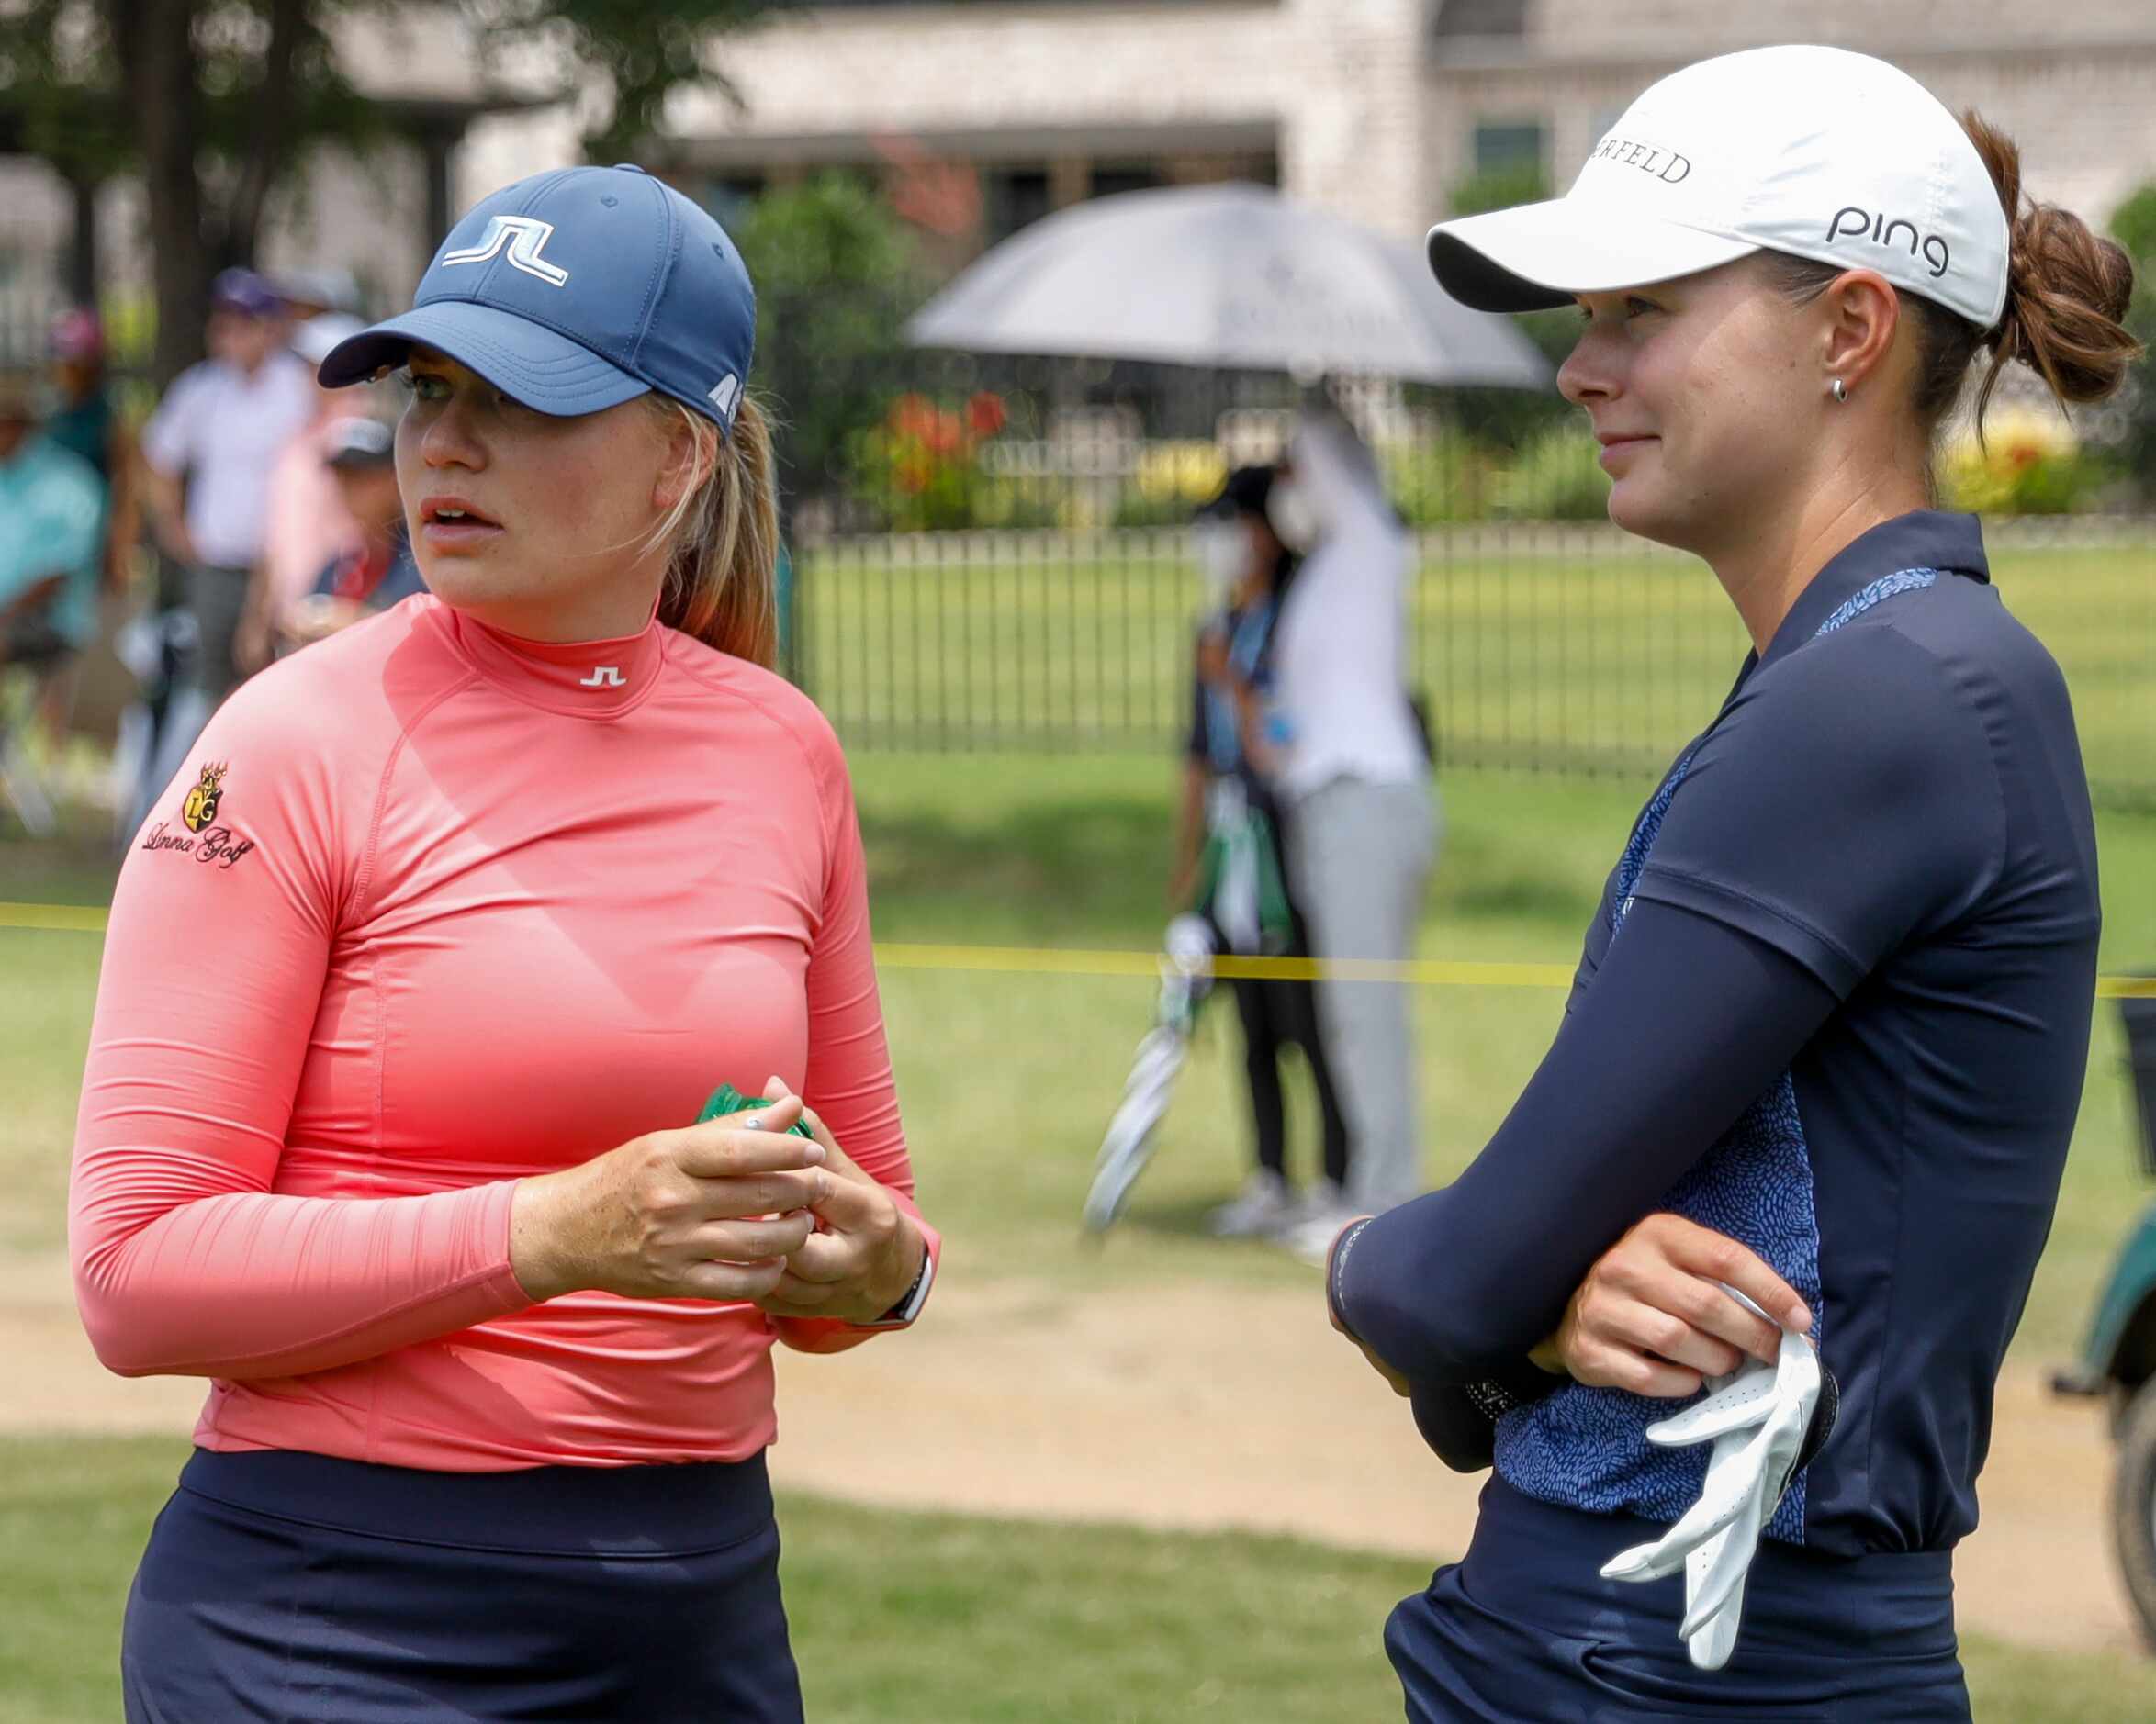 Professional golfers Matilda Castren (left) and Esther Henseleit chat after completing the...